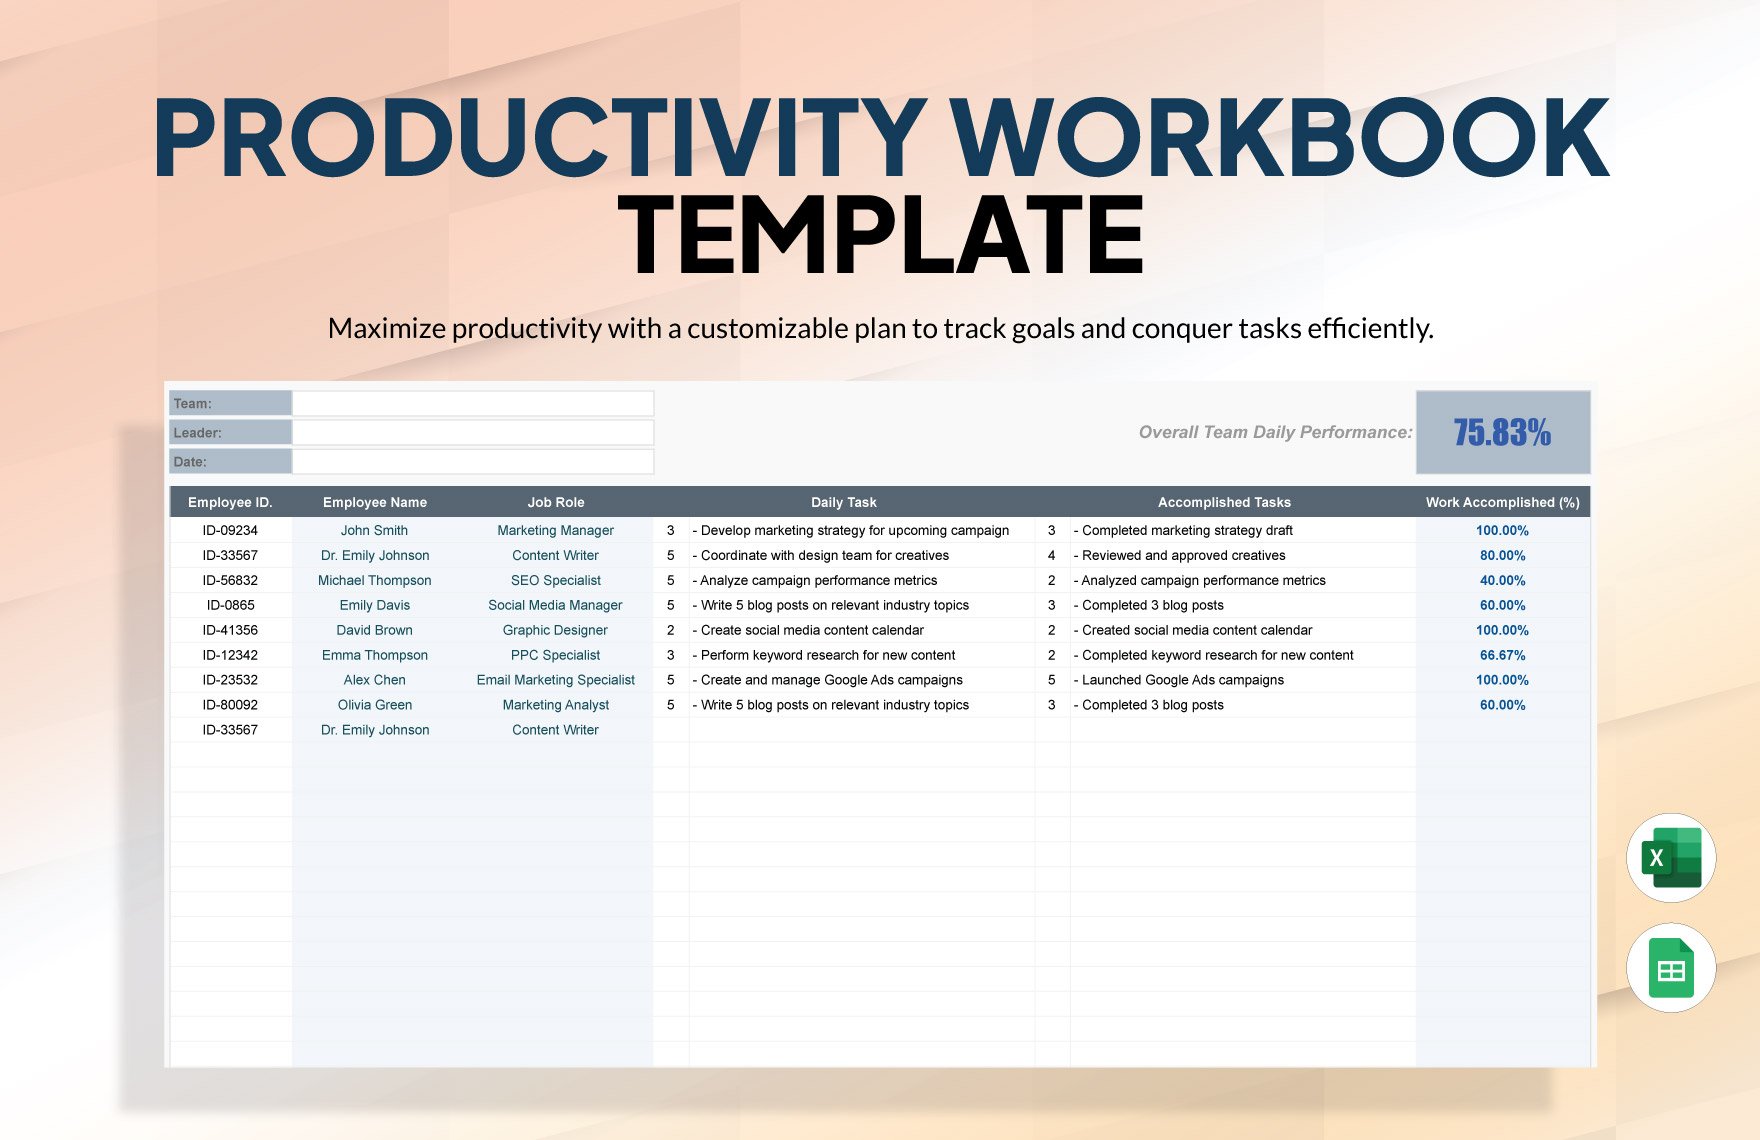 Productivity Workbook Template in Excel, Google Sheets